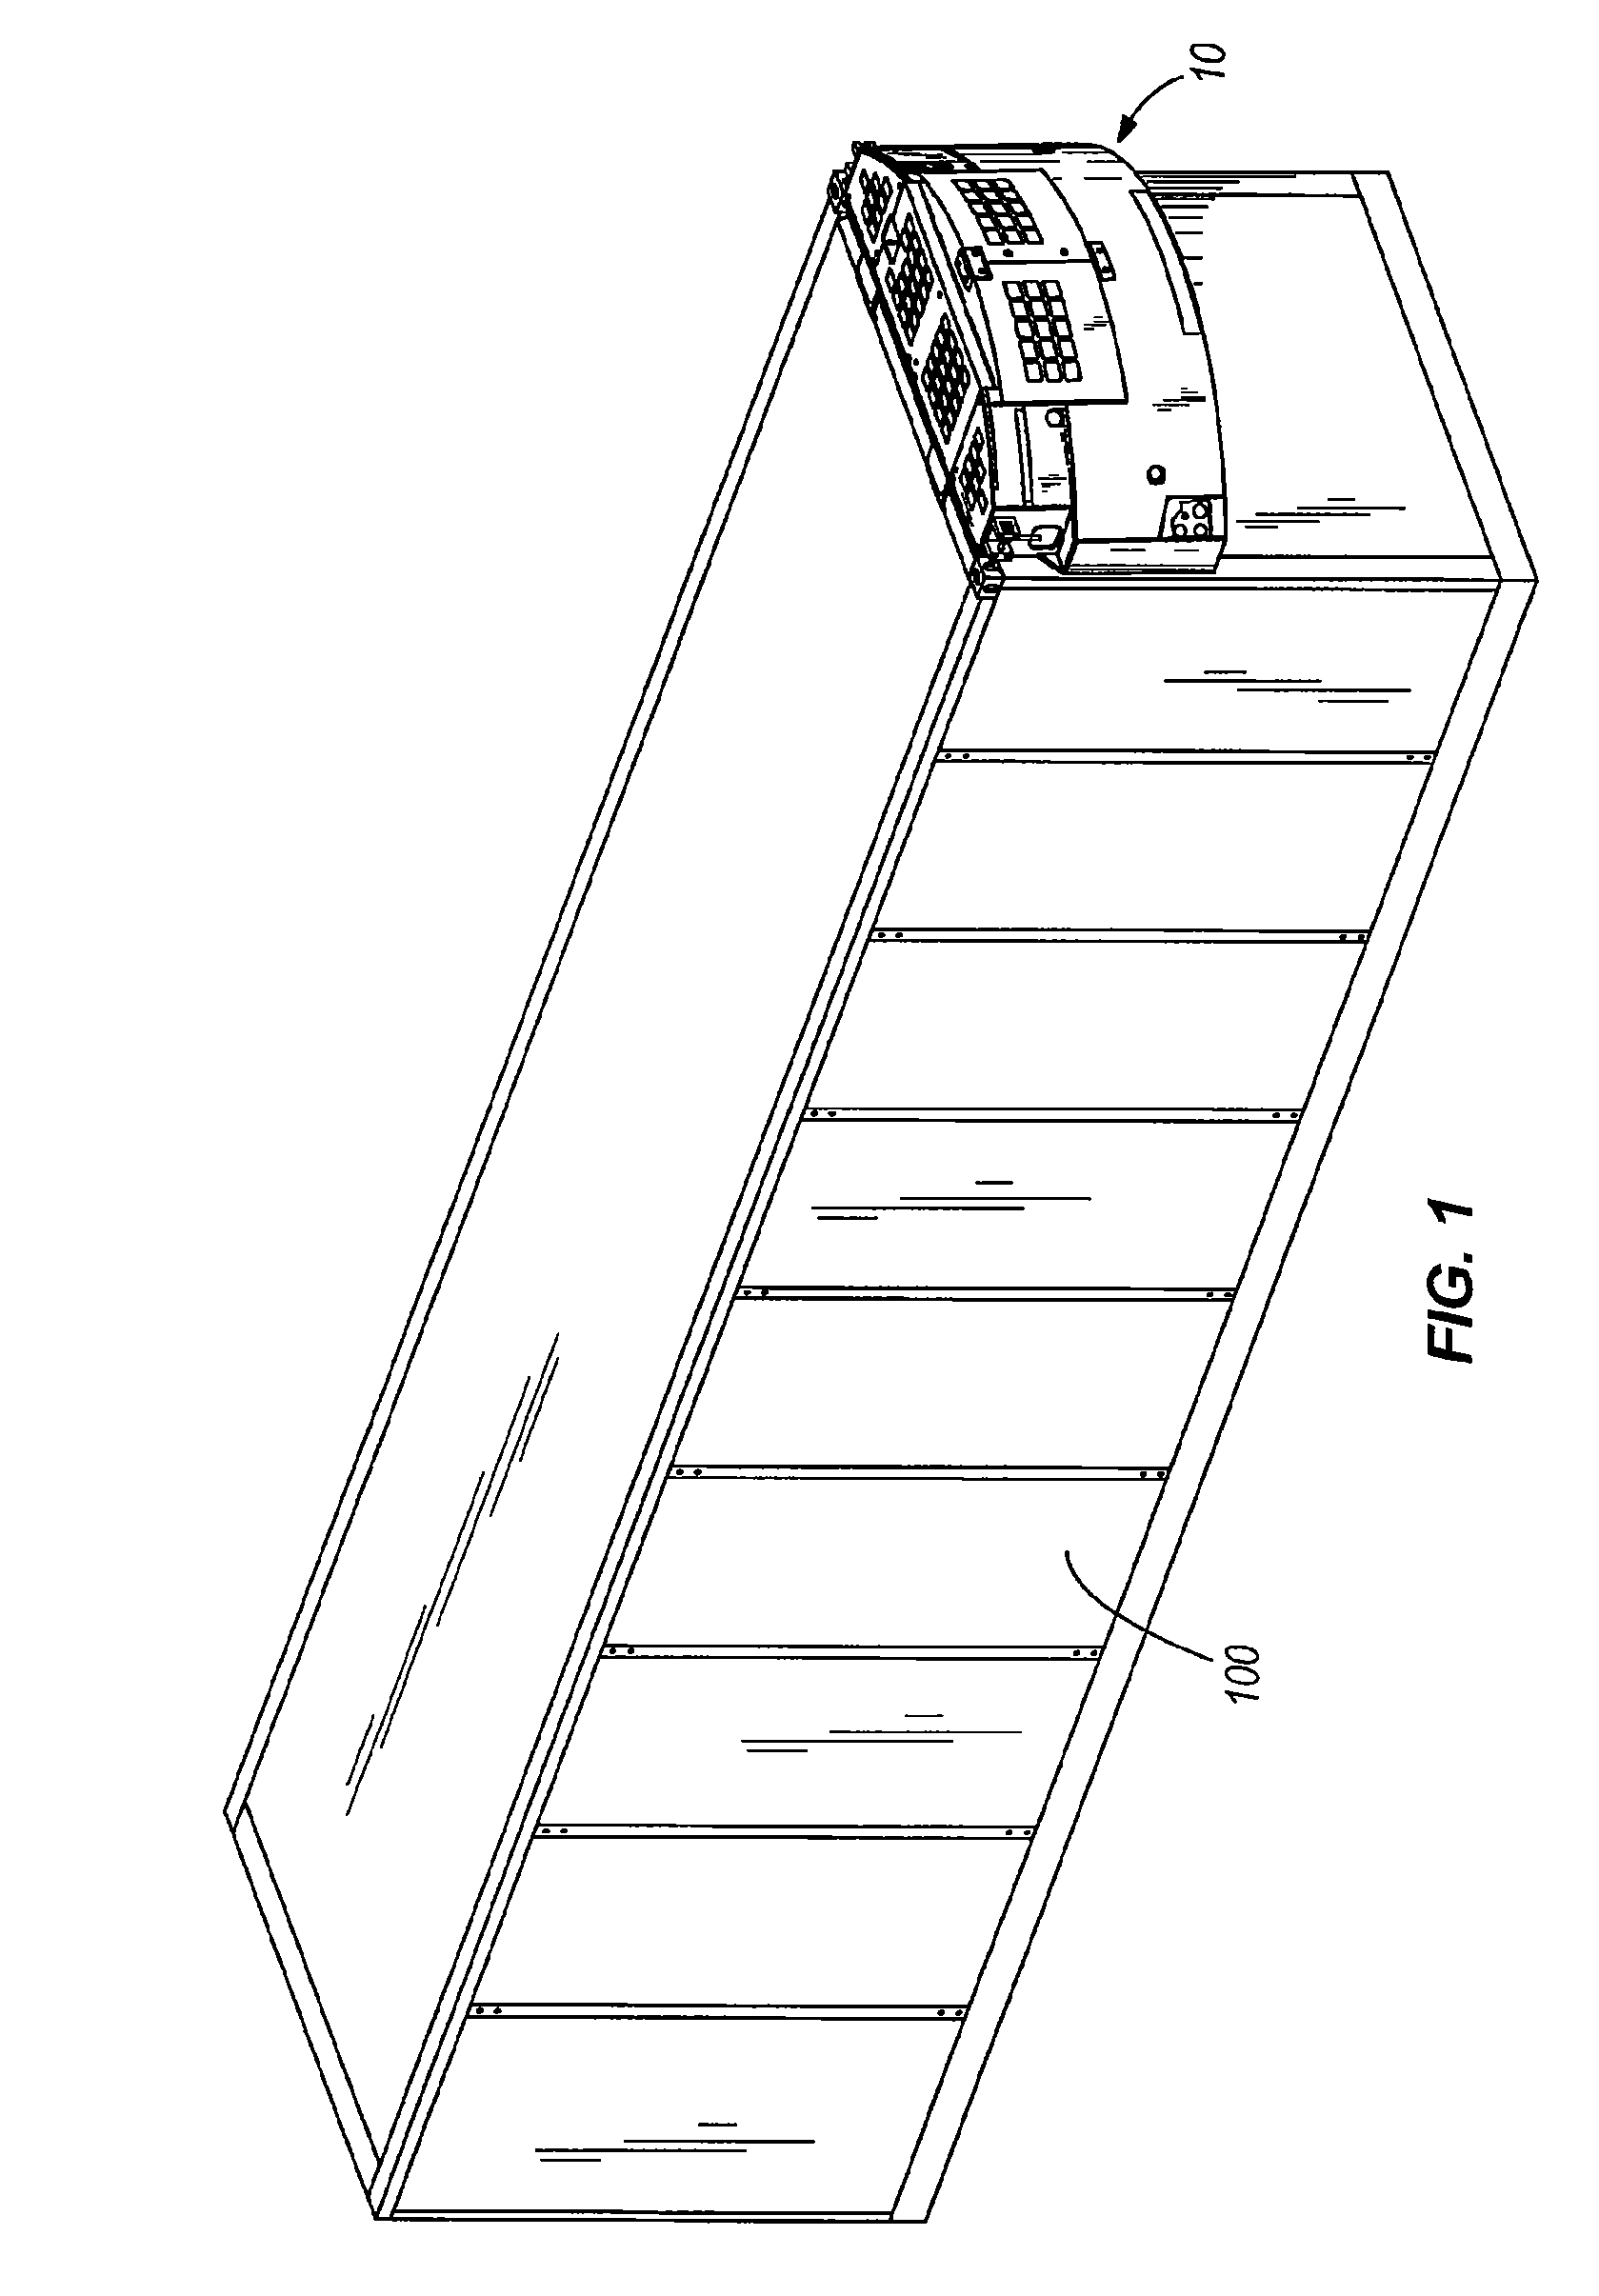 Method for in-service testing a climate control system for a container